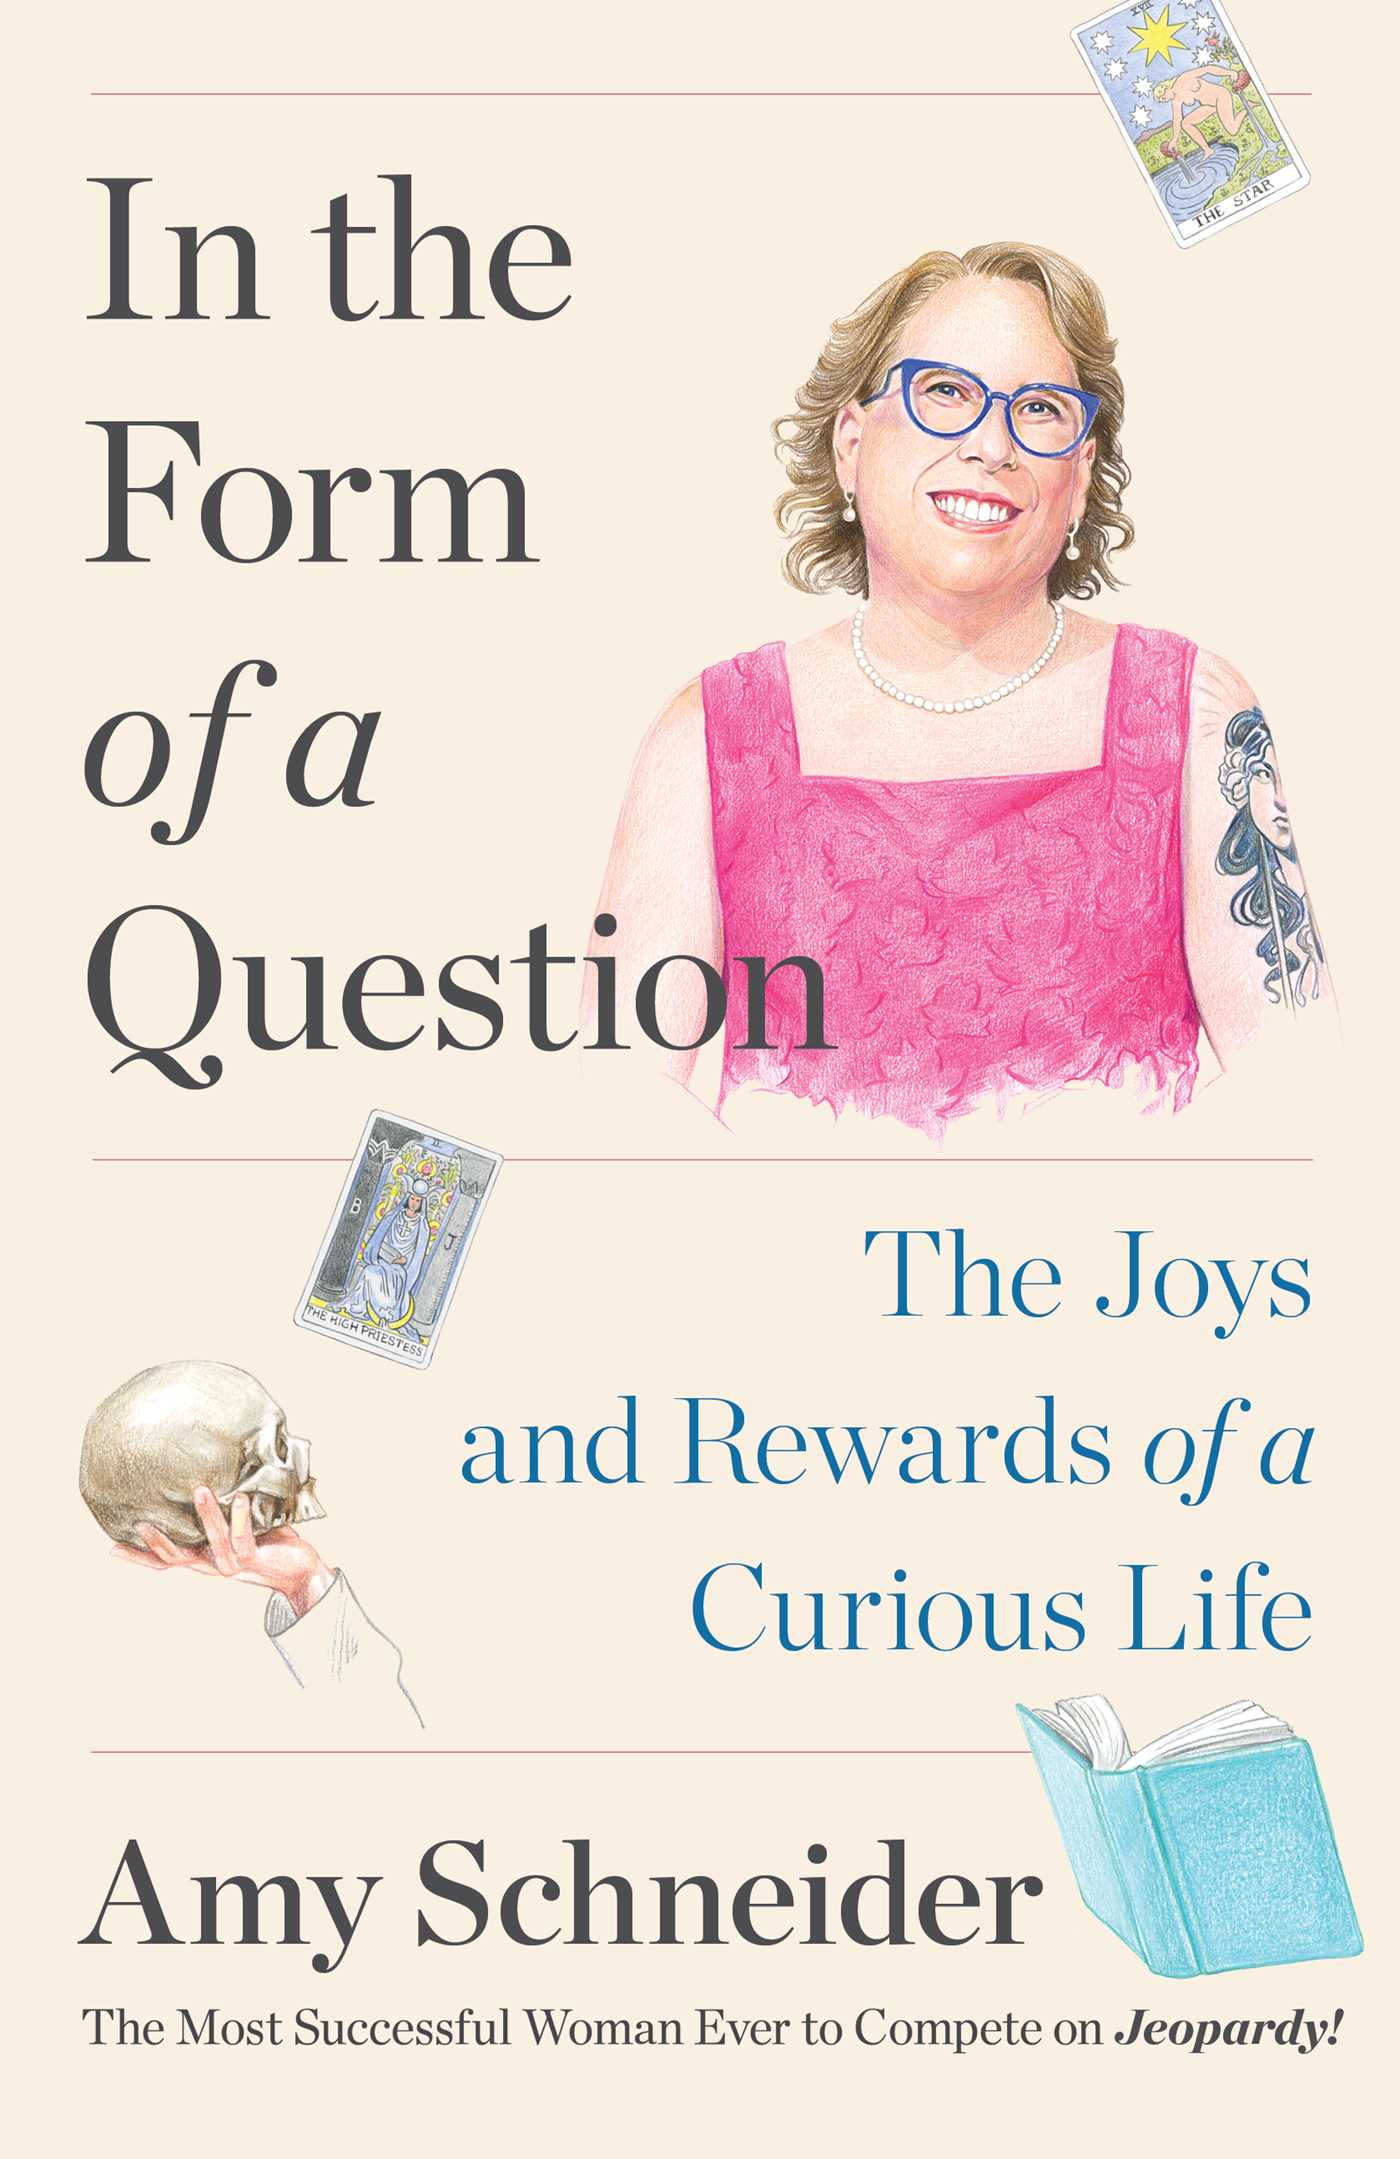 Imagen de portada para In the Form of a Question [electronic resource] : The Joys and Rewards of a Curious Life